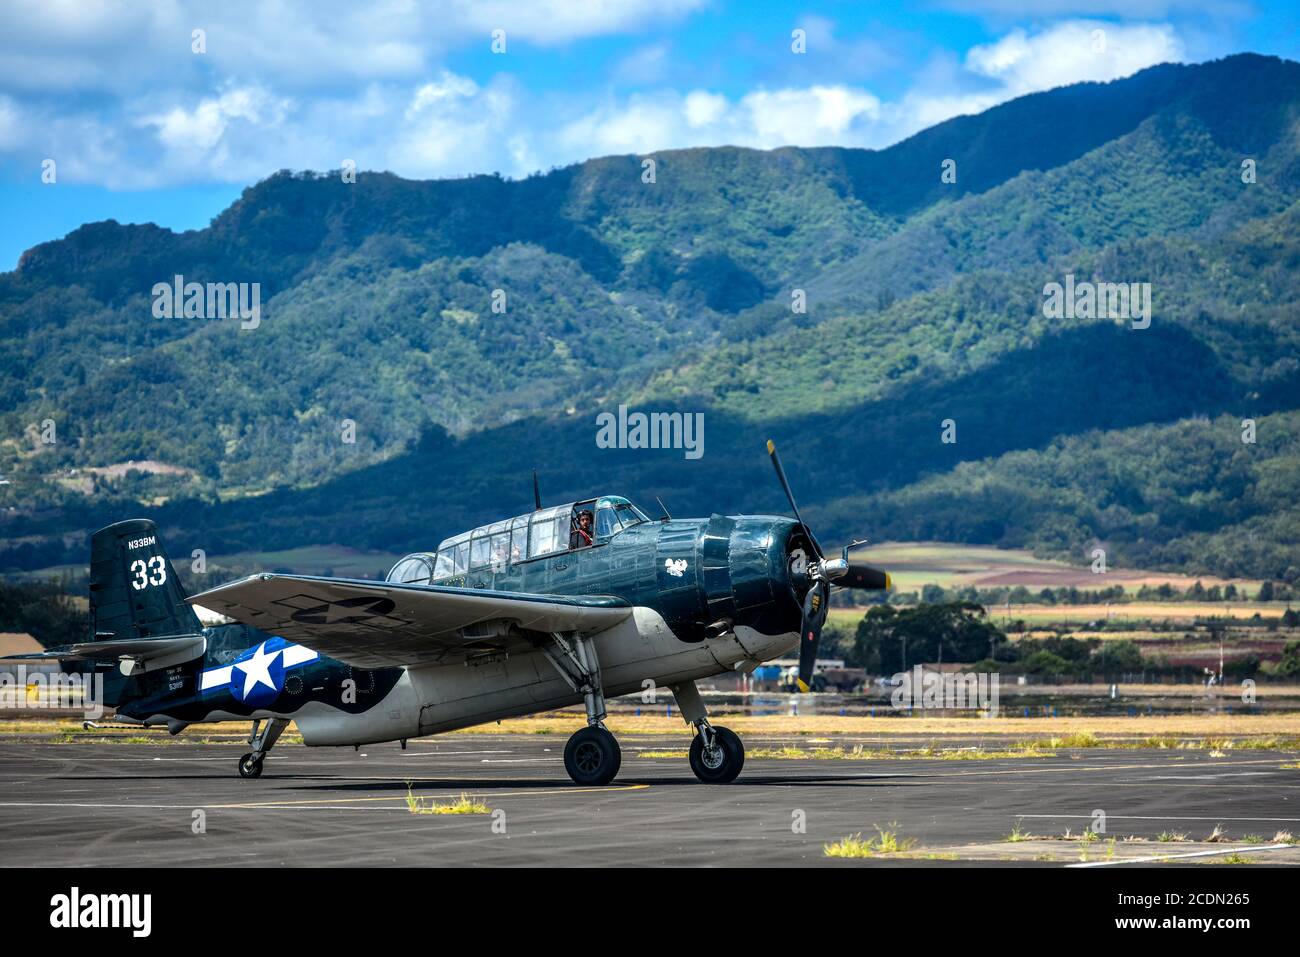 A Grumman TBM Avenger taxis on the runway at Wheeler Army Airfield, Hawaii, August 27, 2020. The Avenger is one of the 14 classic combat aircraft slated to participate in the Oahu flyovers as part of the Official 75th Commemoration of the End of WWII Sept. 2, 2020. World War II remains a historic reminder of how the dedicated resolve of allies with a common purpose and shared vision builds proven partnerships that ensure we continue to stand together with our allies and partners in maintaining a free and open Indo-Pacific.    (U.S. Air Force photo by Tech. Sgt. Anthony Nelson Jr.) Stock Photo